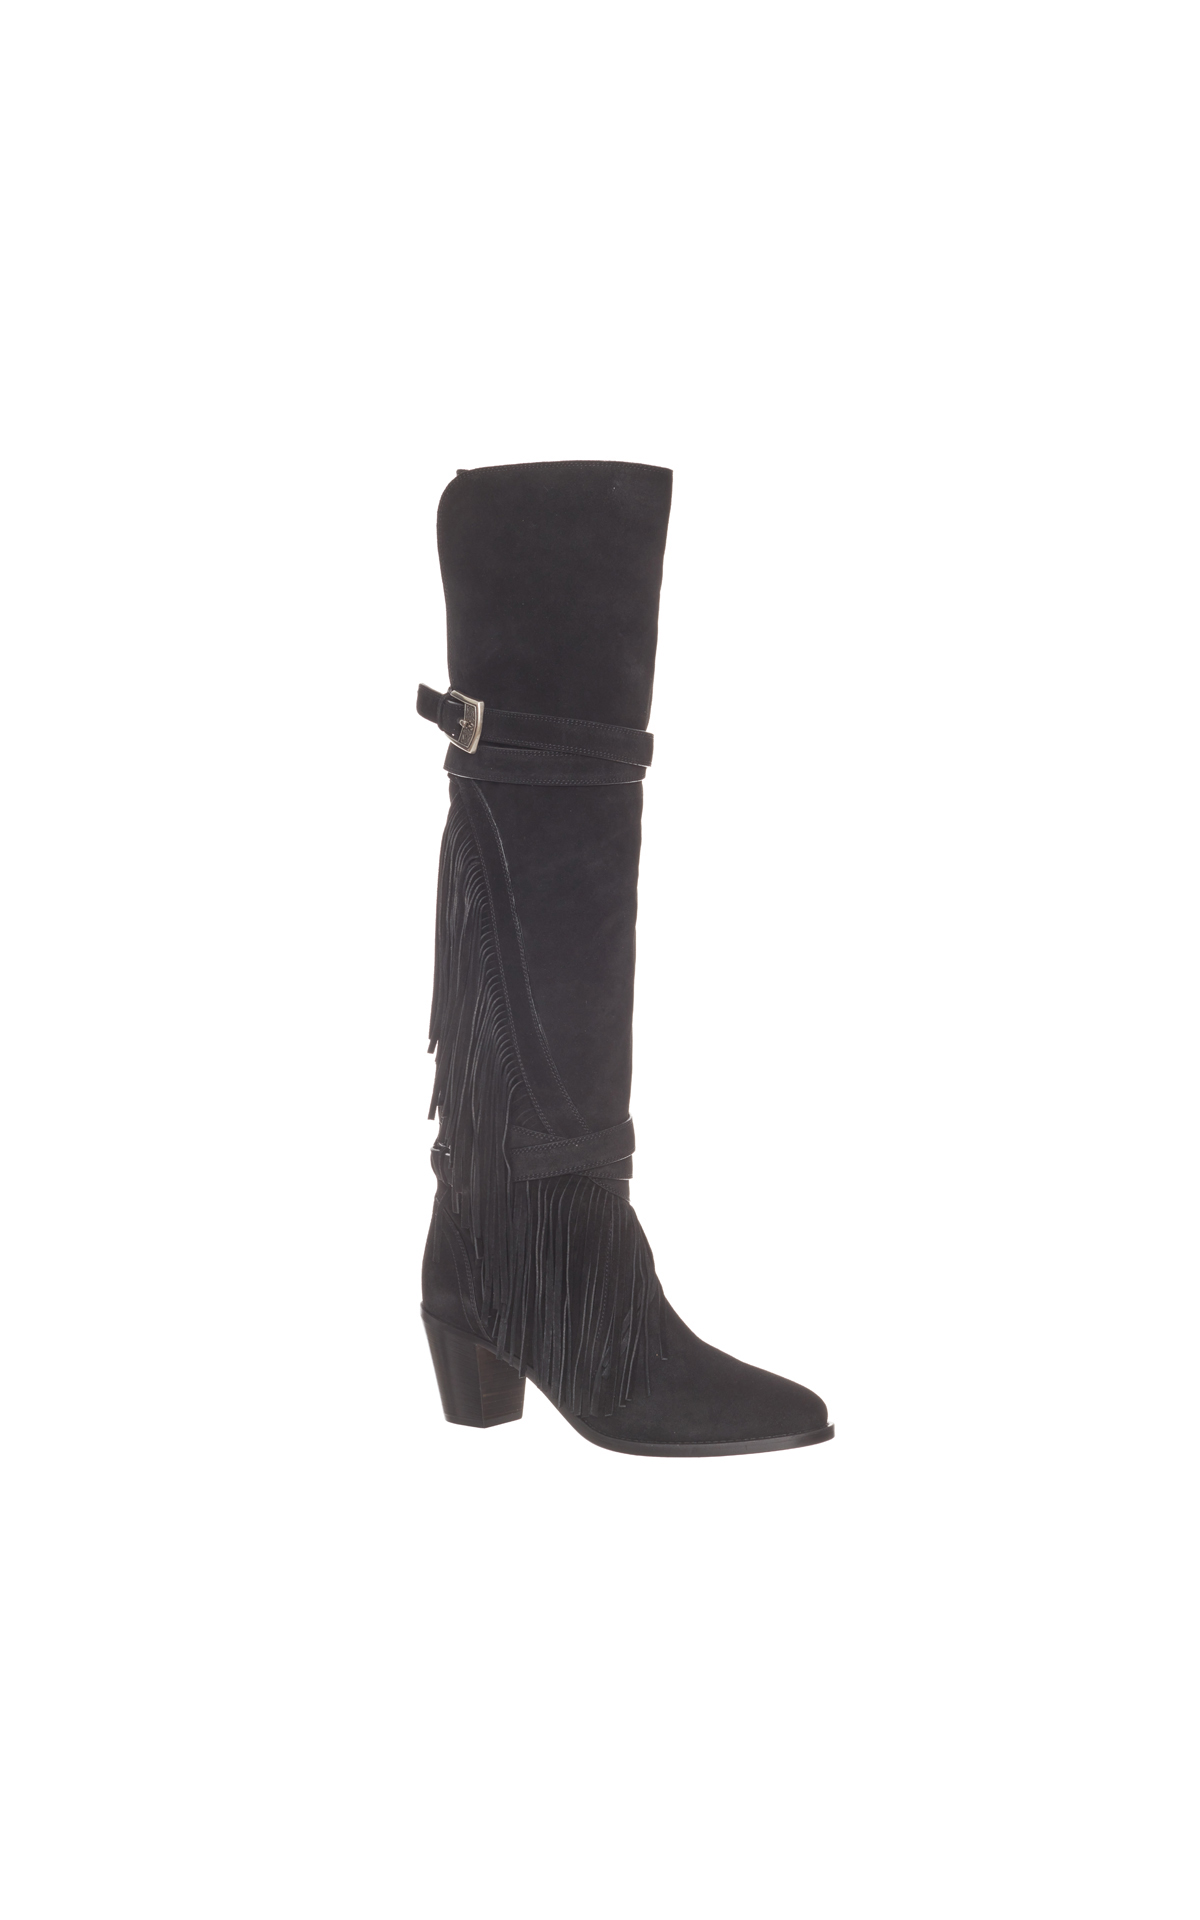 Etro Black knee high boot from Bicester Village